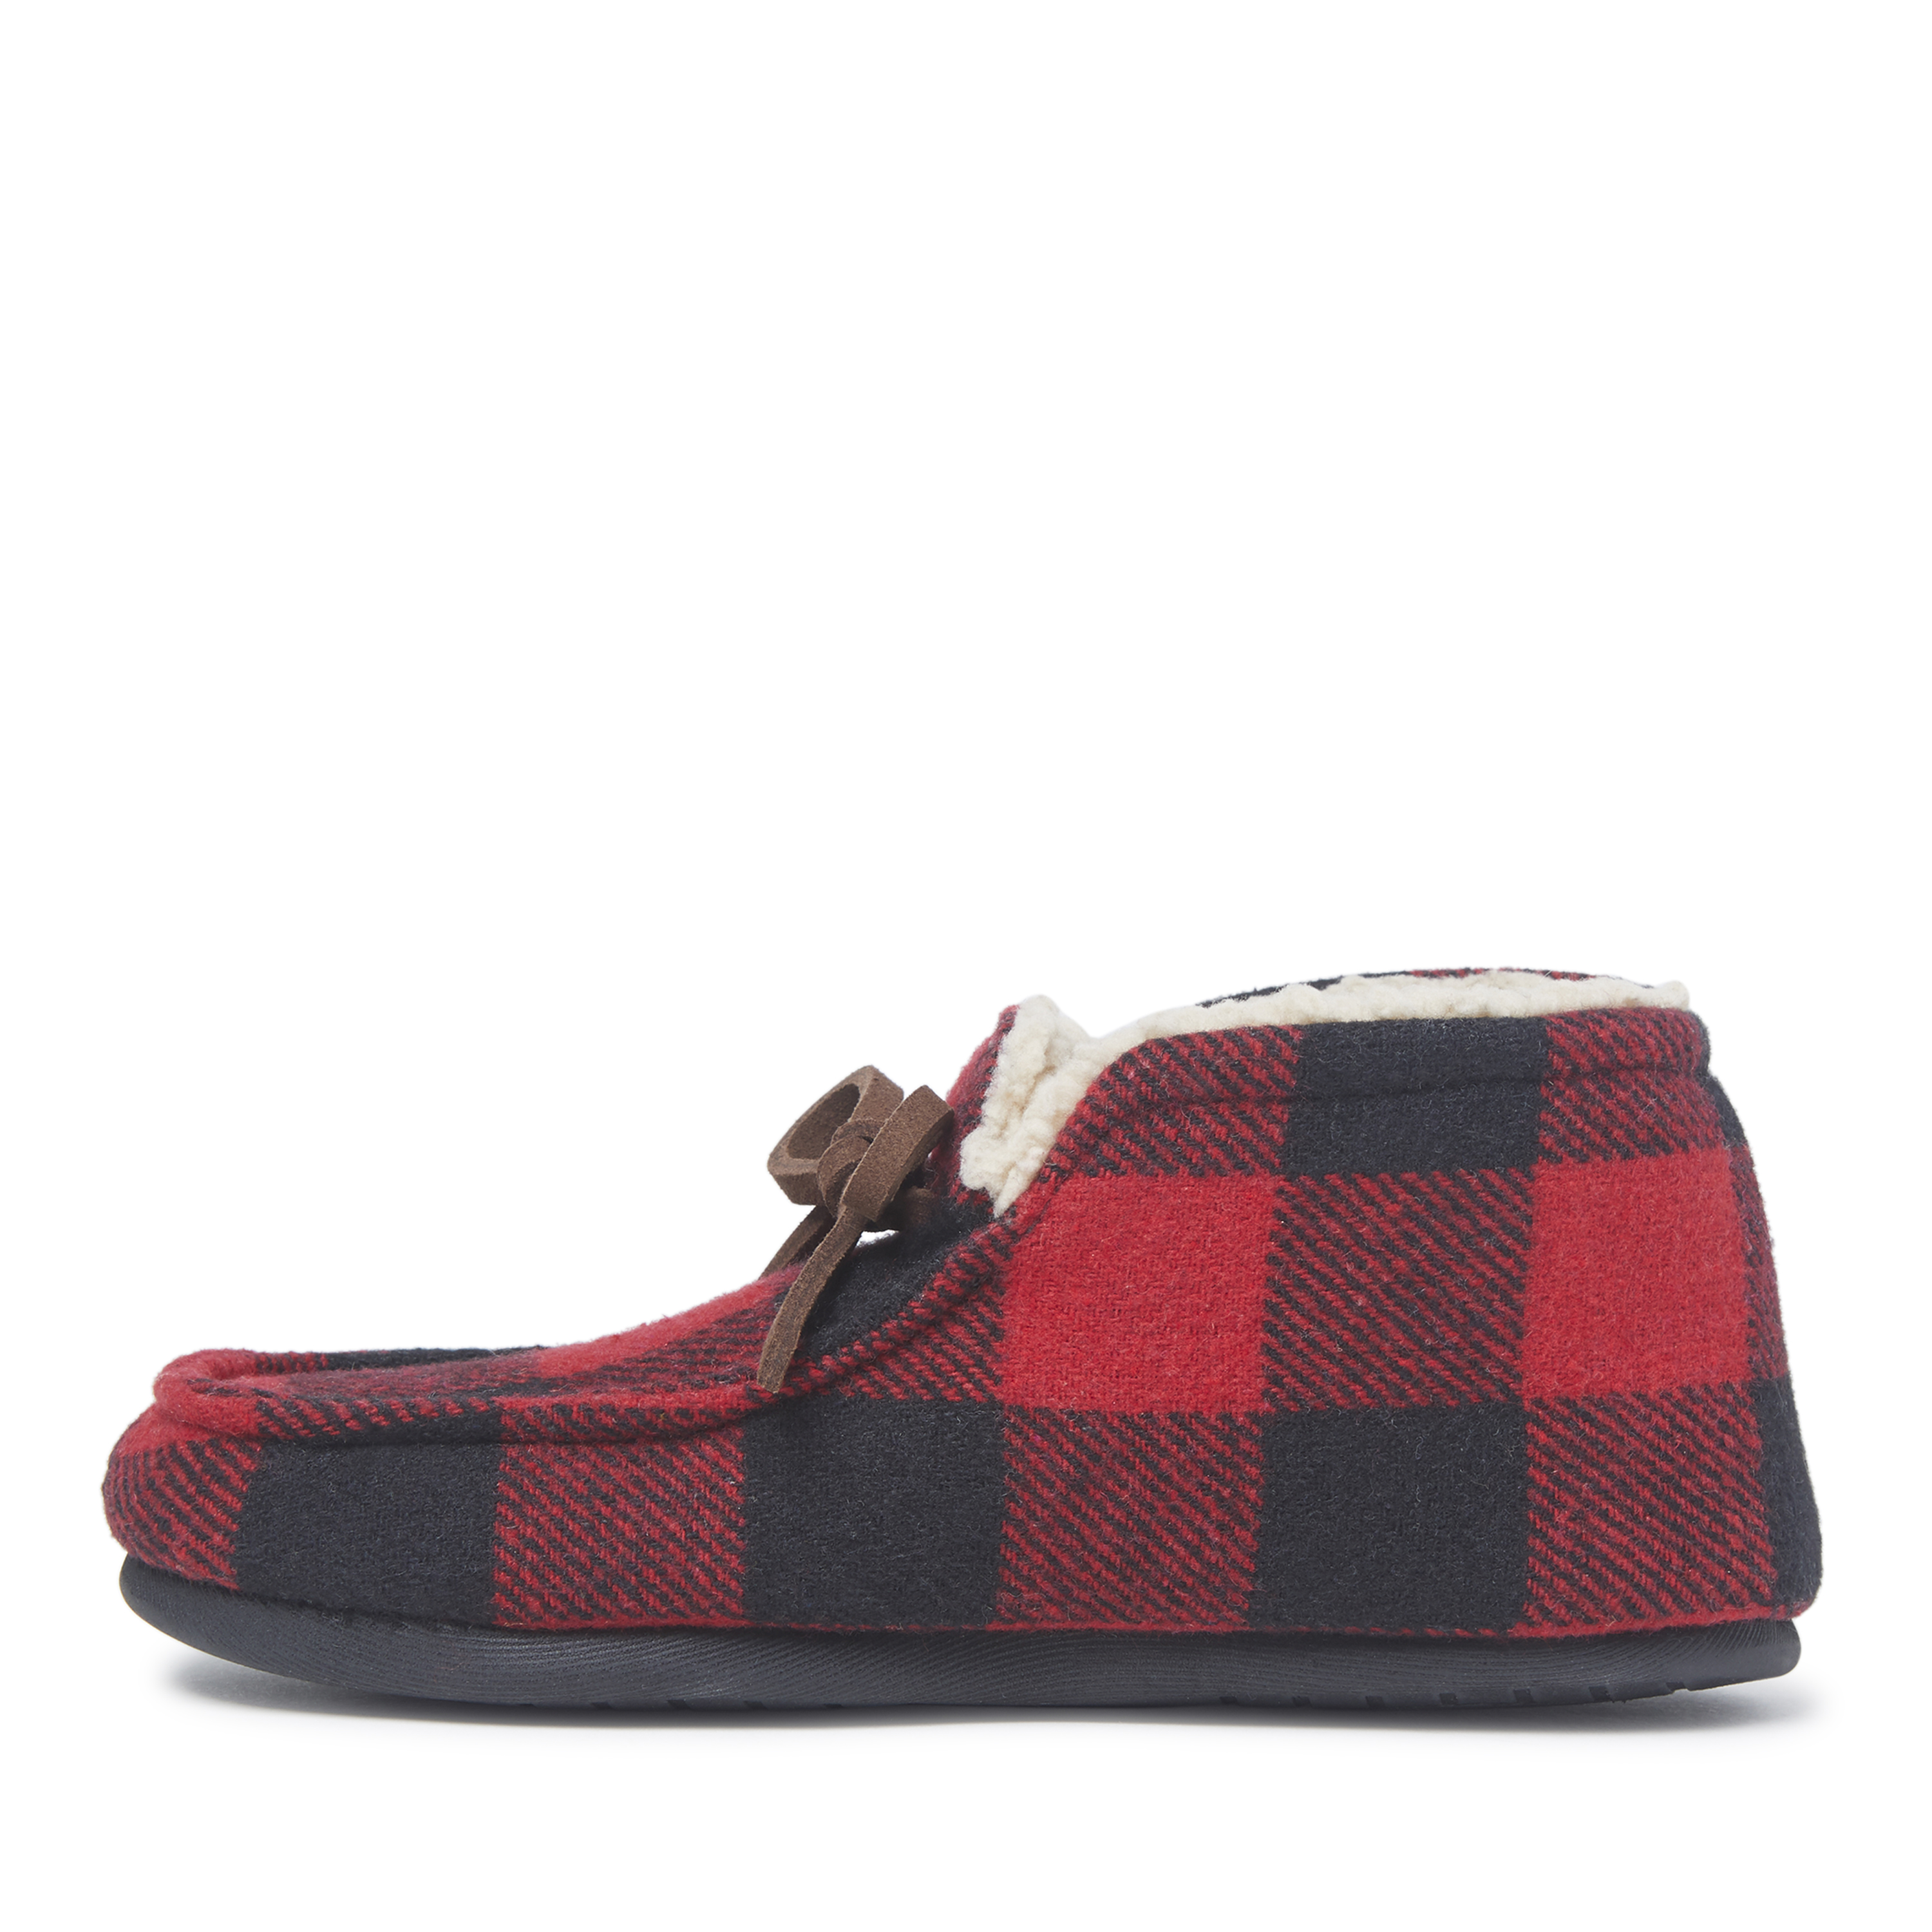 Kids Ankle Boots Plaid Fleece with Tie Lace Warm Shoes Featured Image